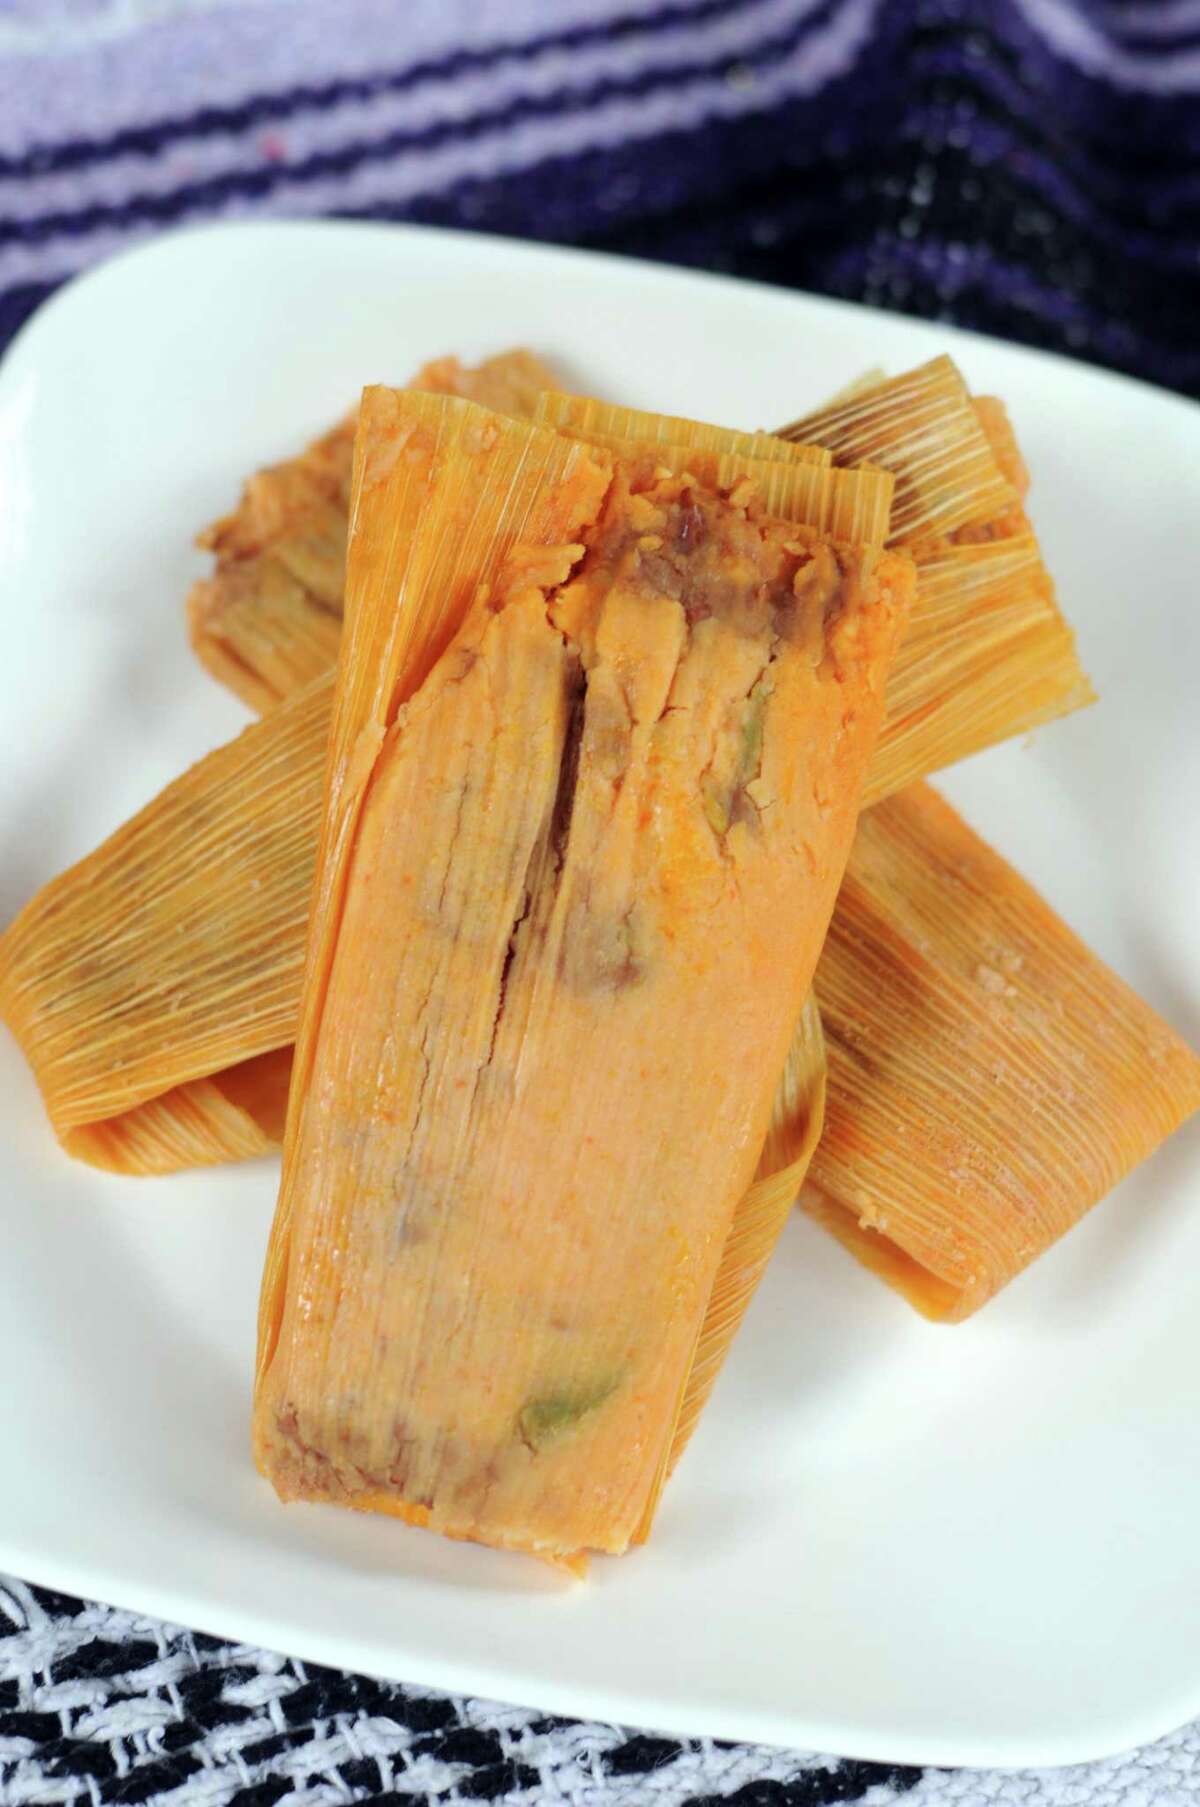 Tamales from Bedoy's Bakery